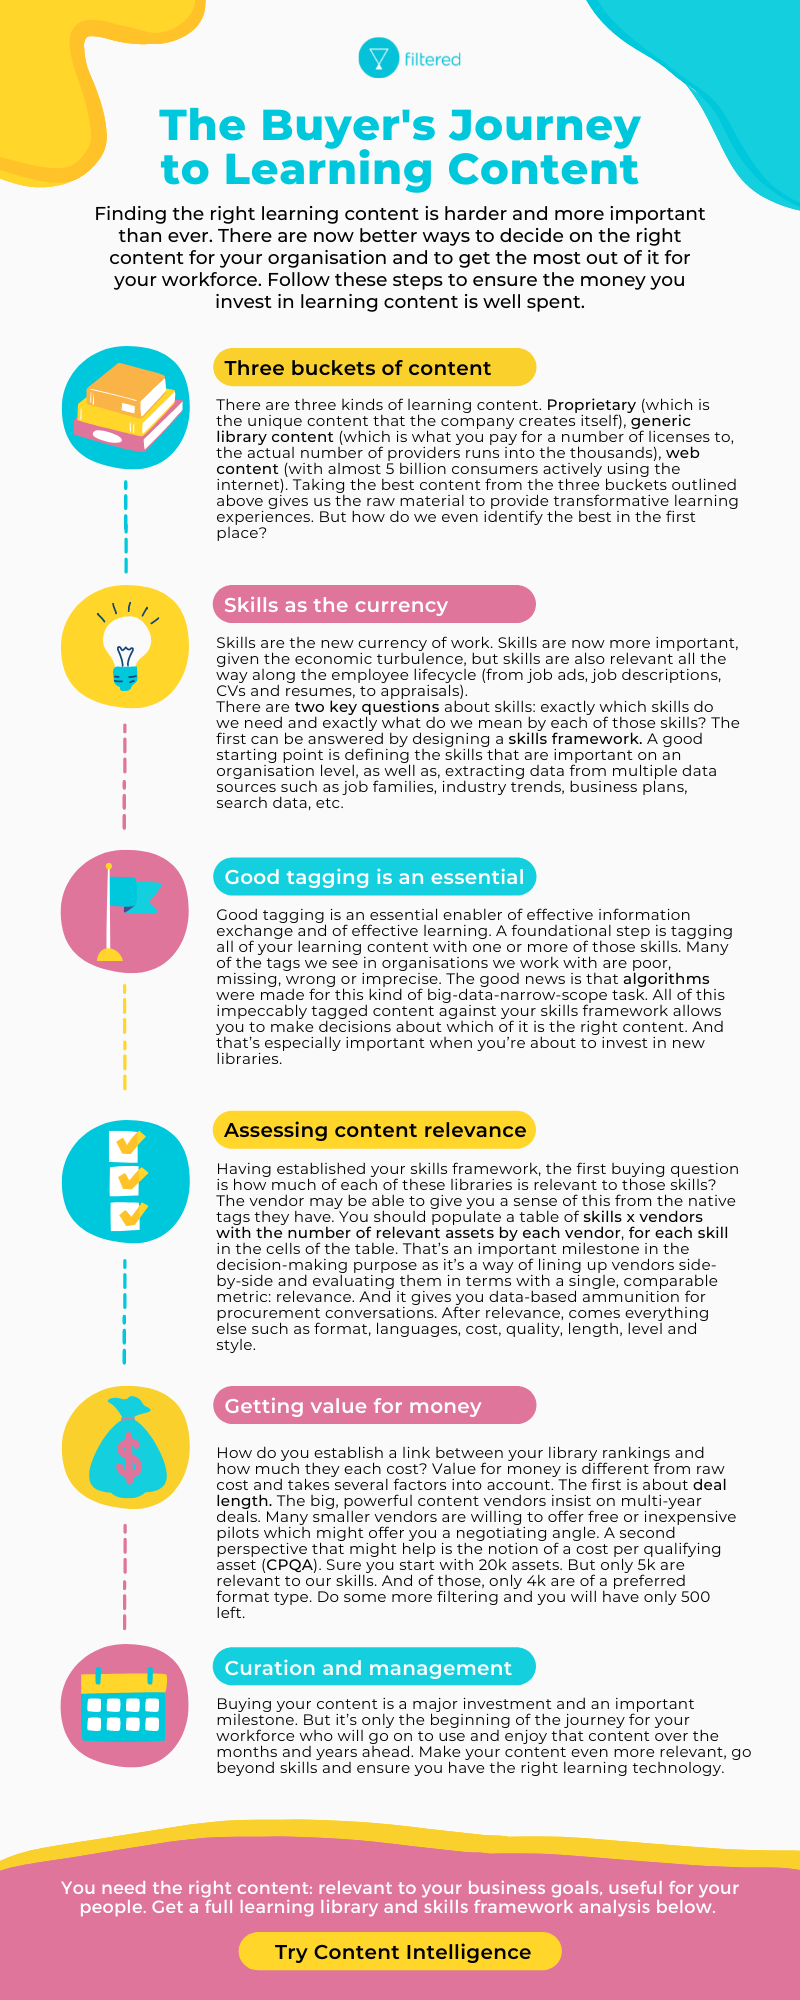 The Buyers Journey to Learning Content